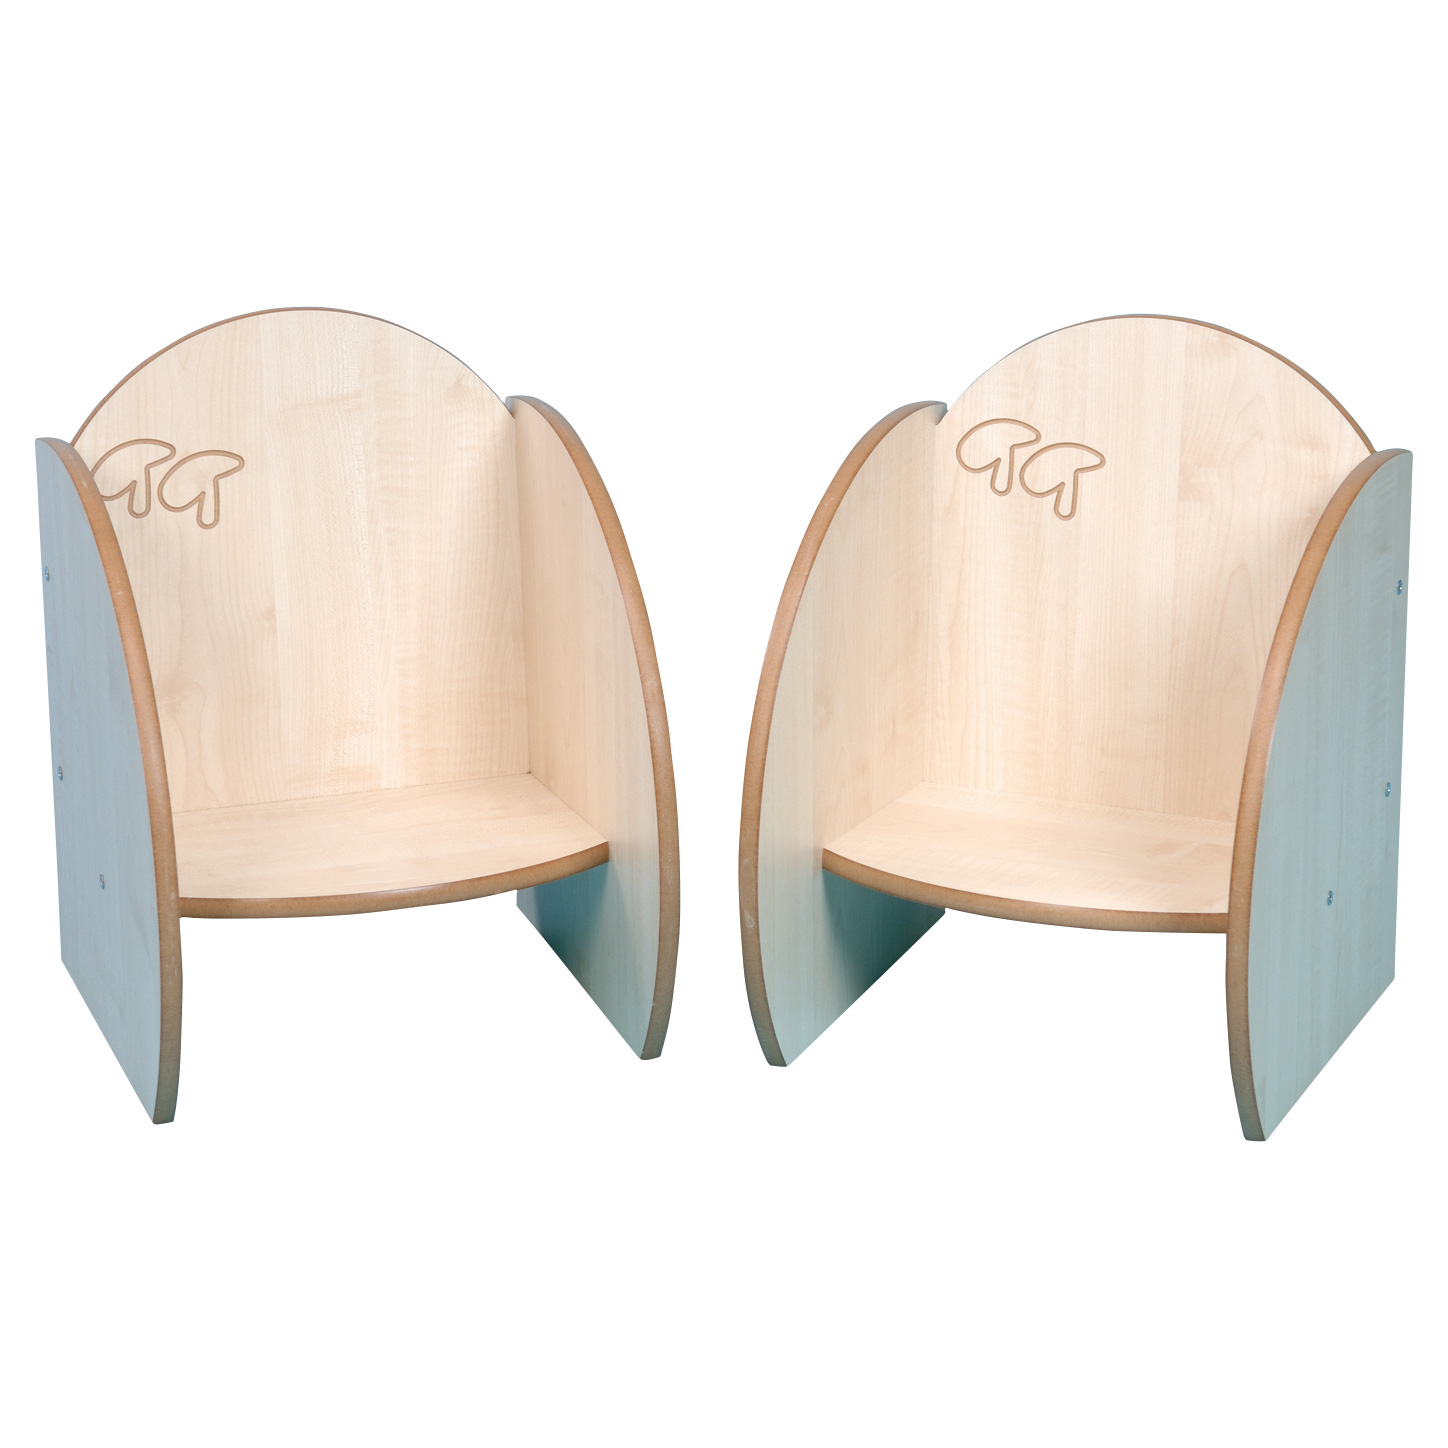 ''Mini'' Children's Wooden Seat 140mm (Pack of 2)